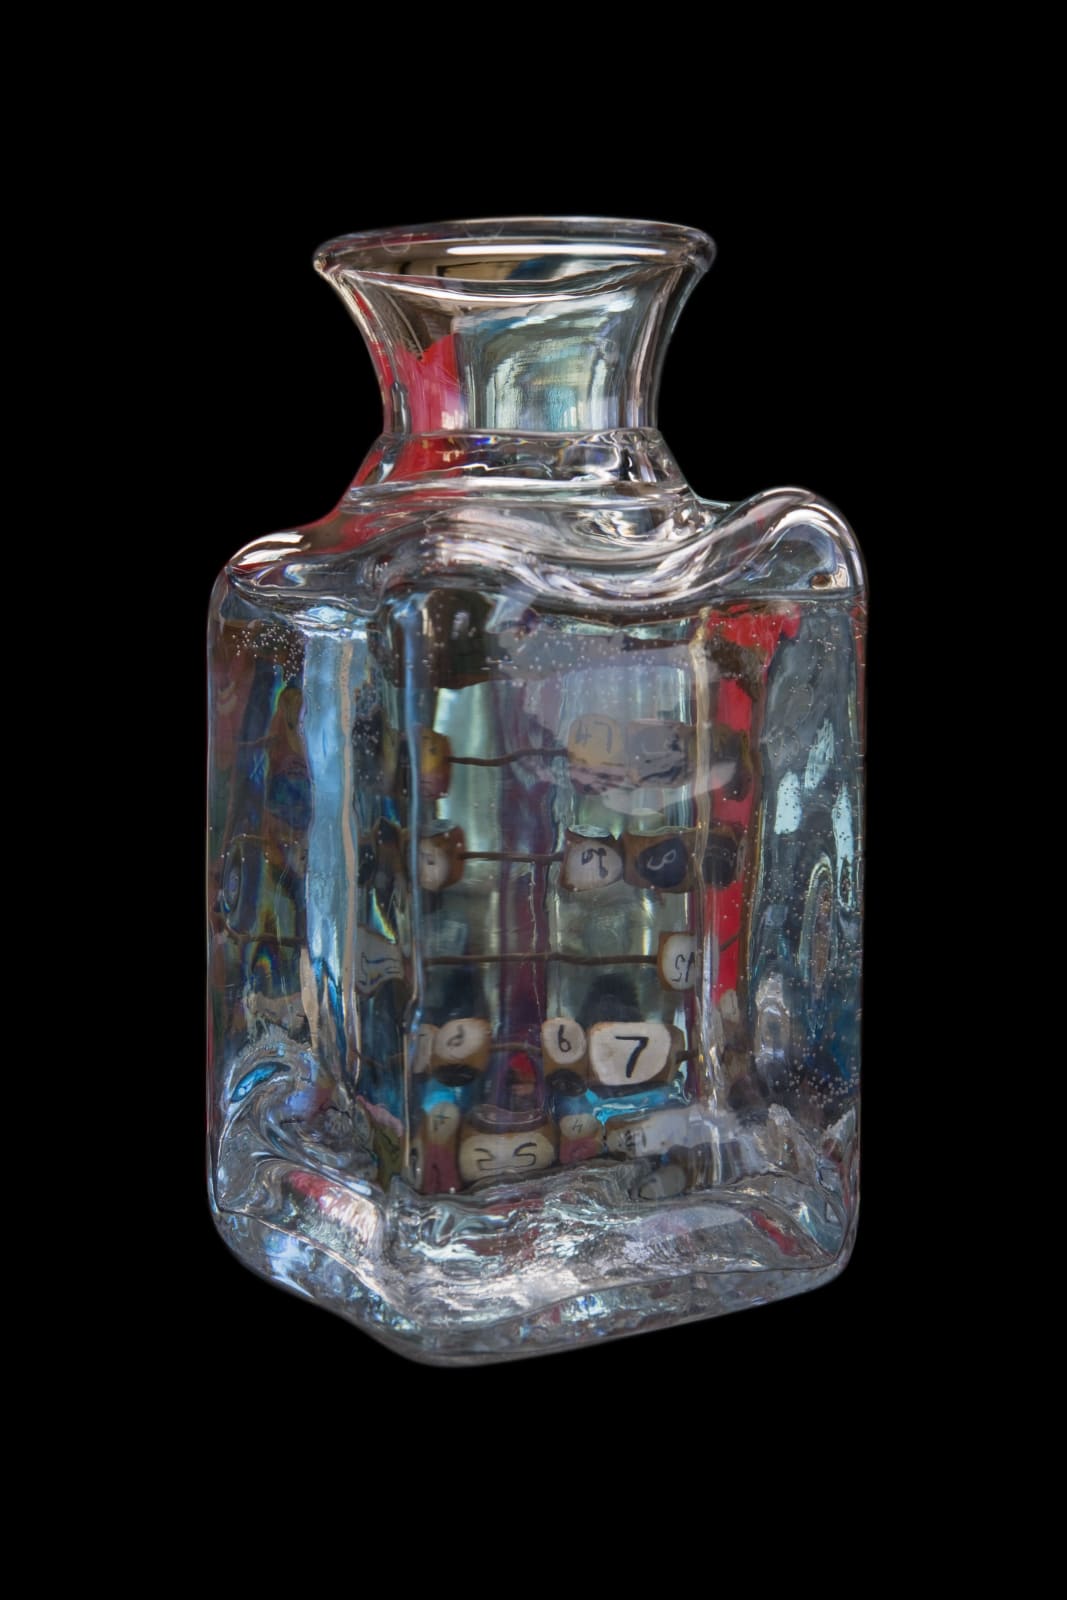 Olivia Parker, Numbers in a Bottle, 2010